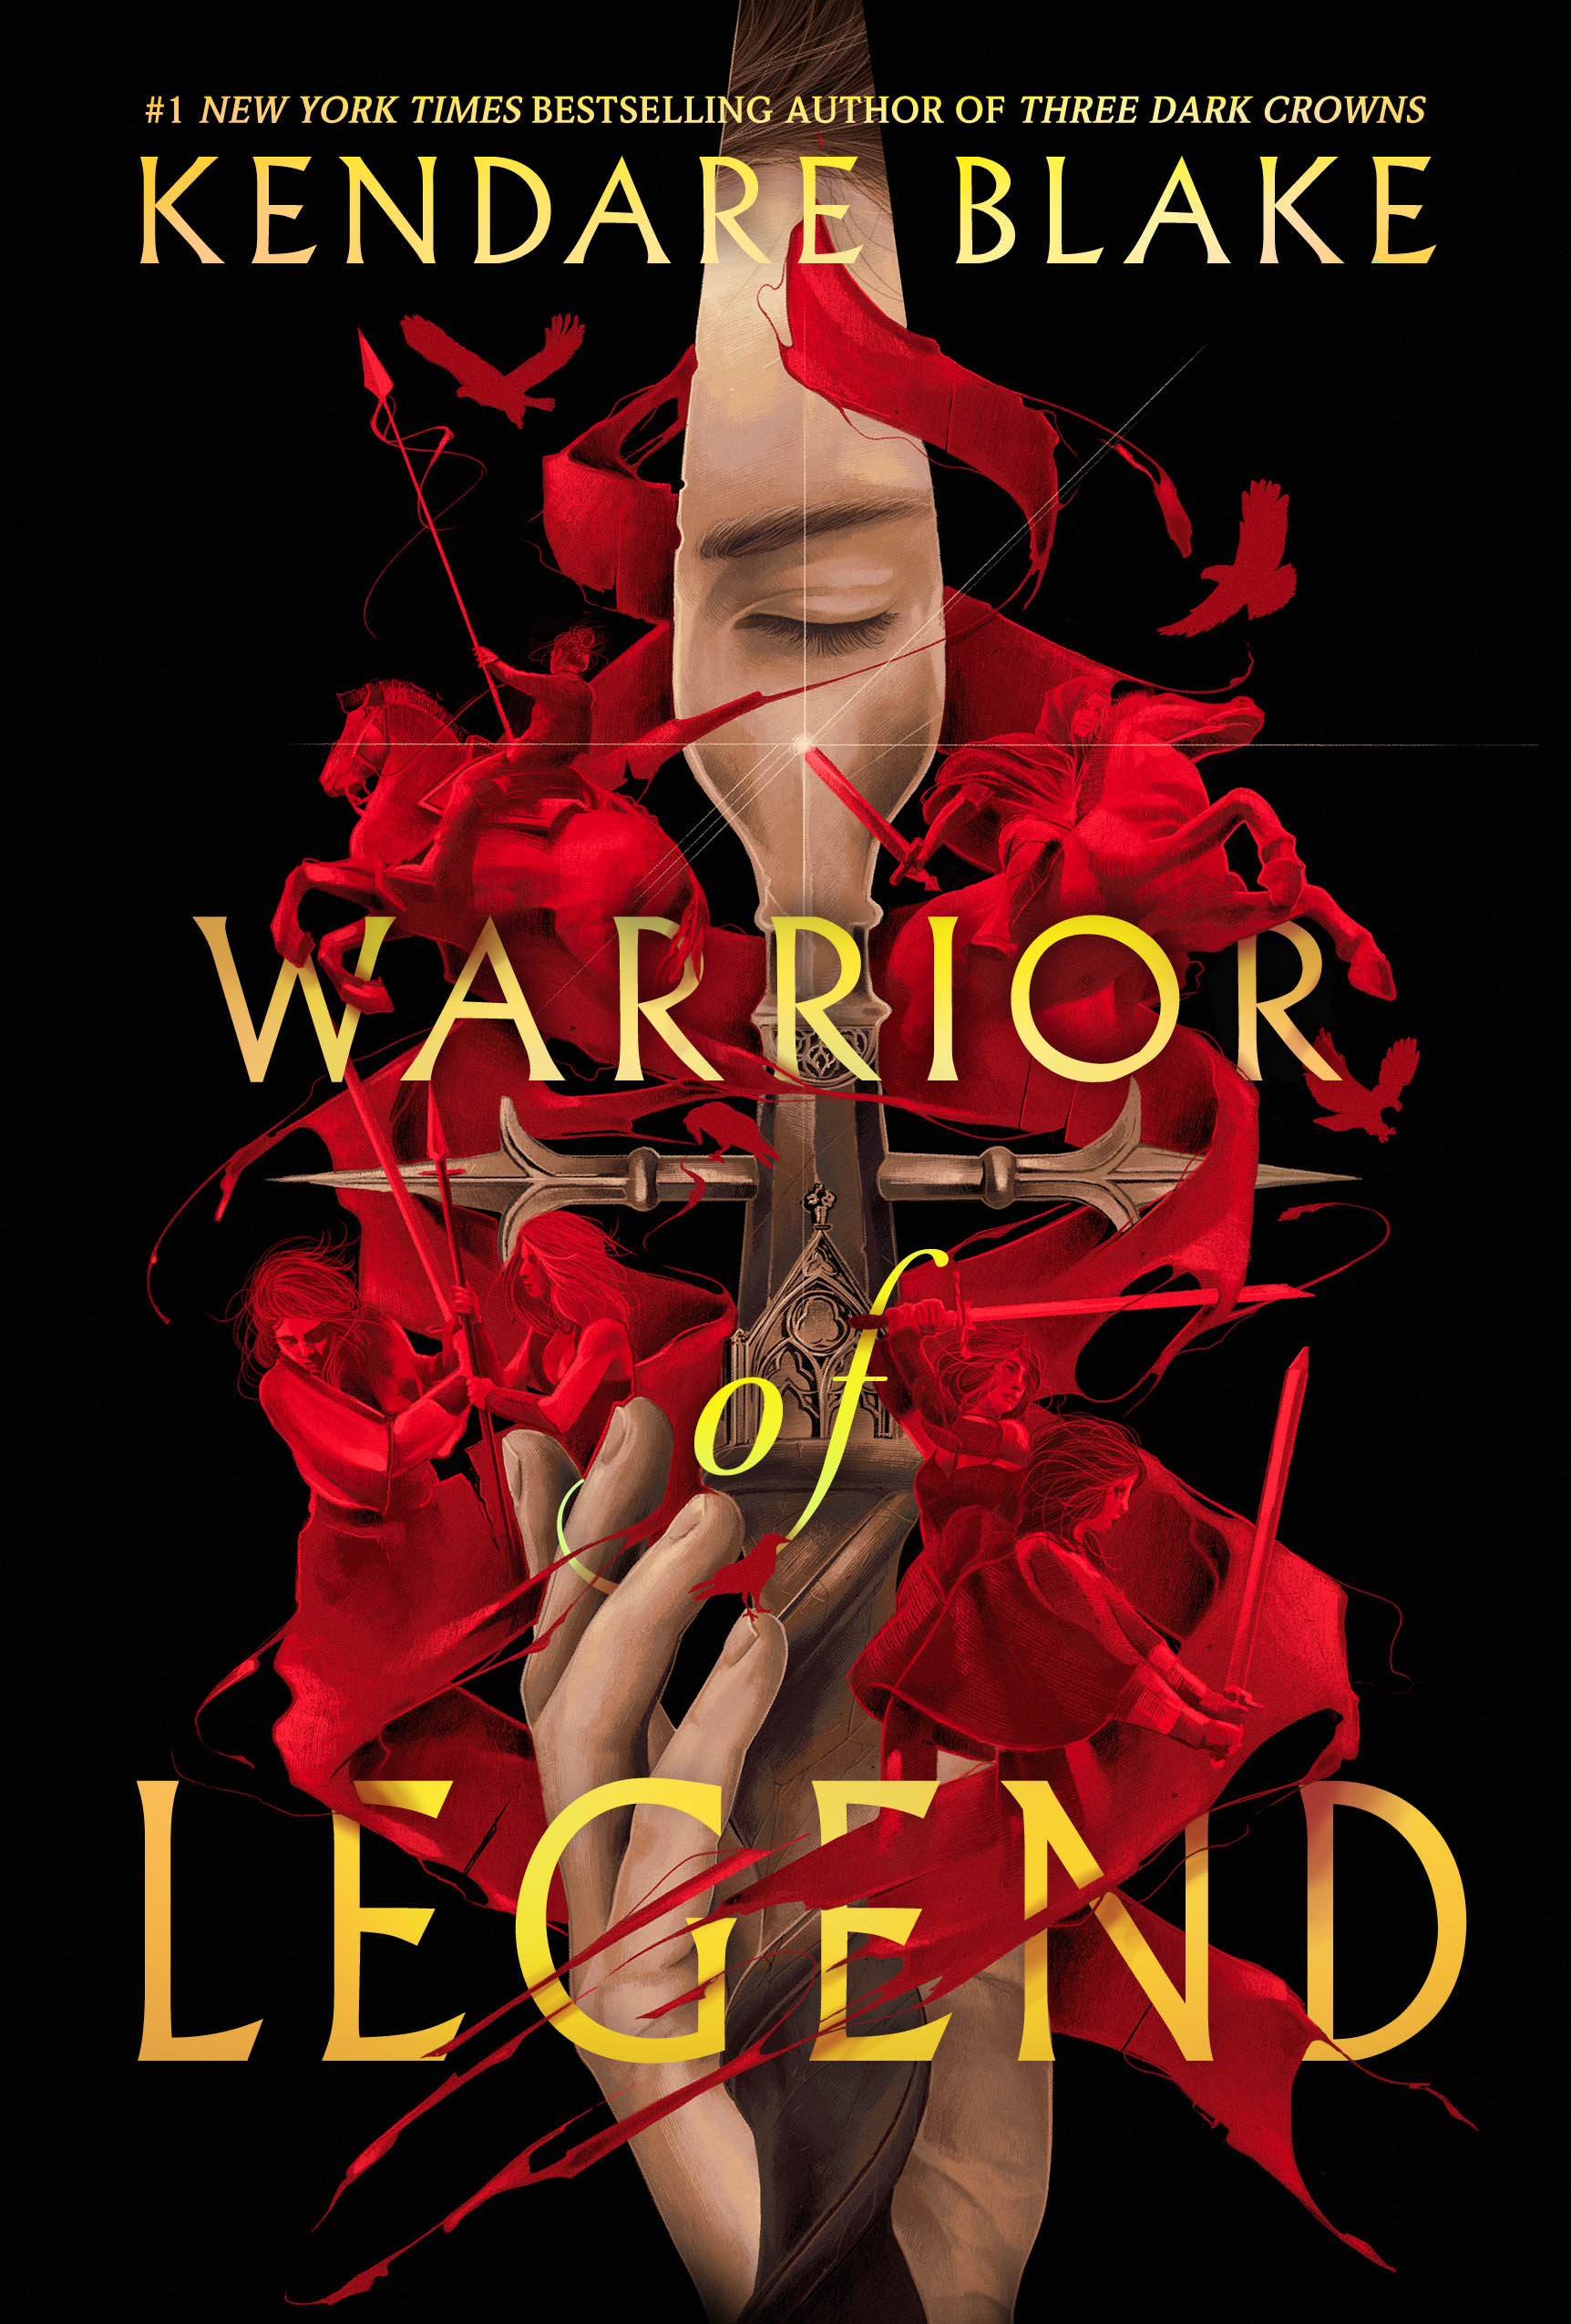 Warrior of Legend cover features red horsies and warriors and Reed reflected in the blade of a spear